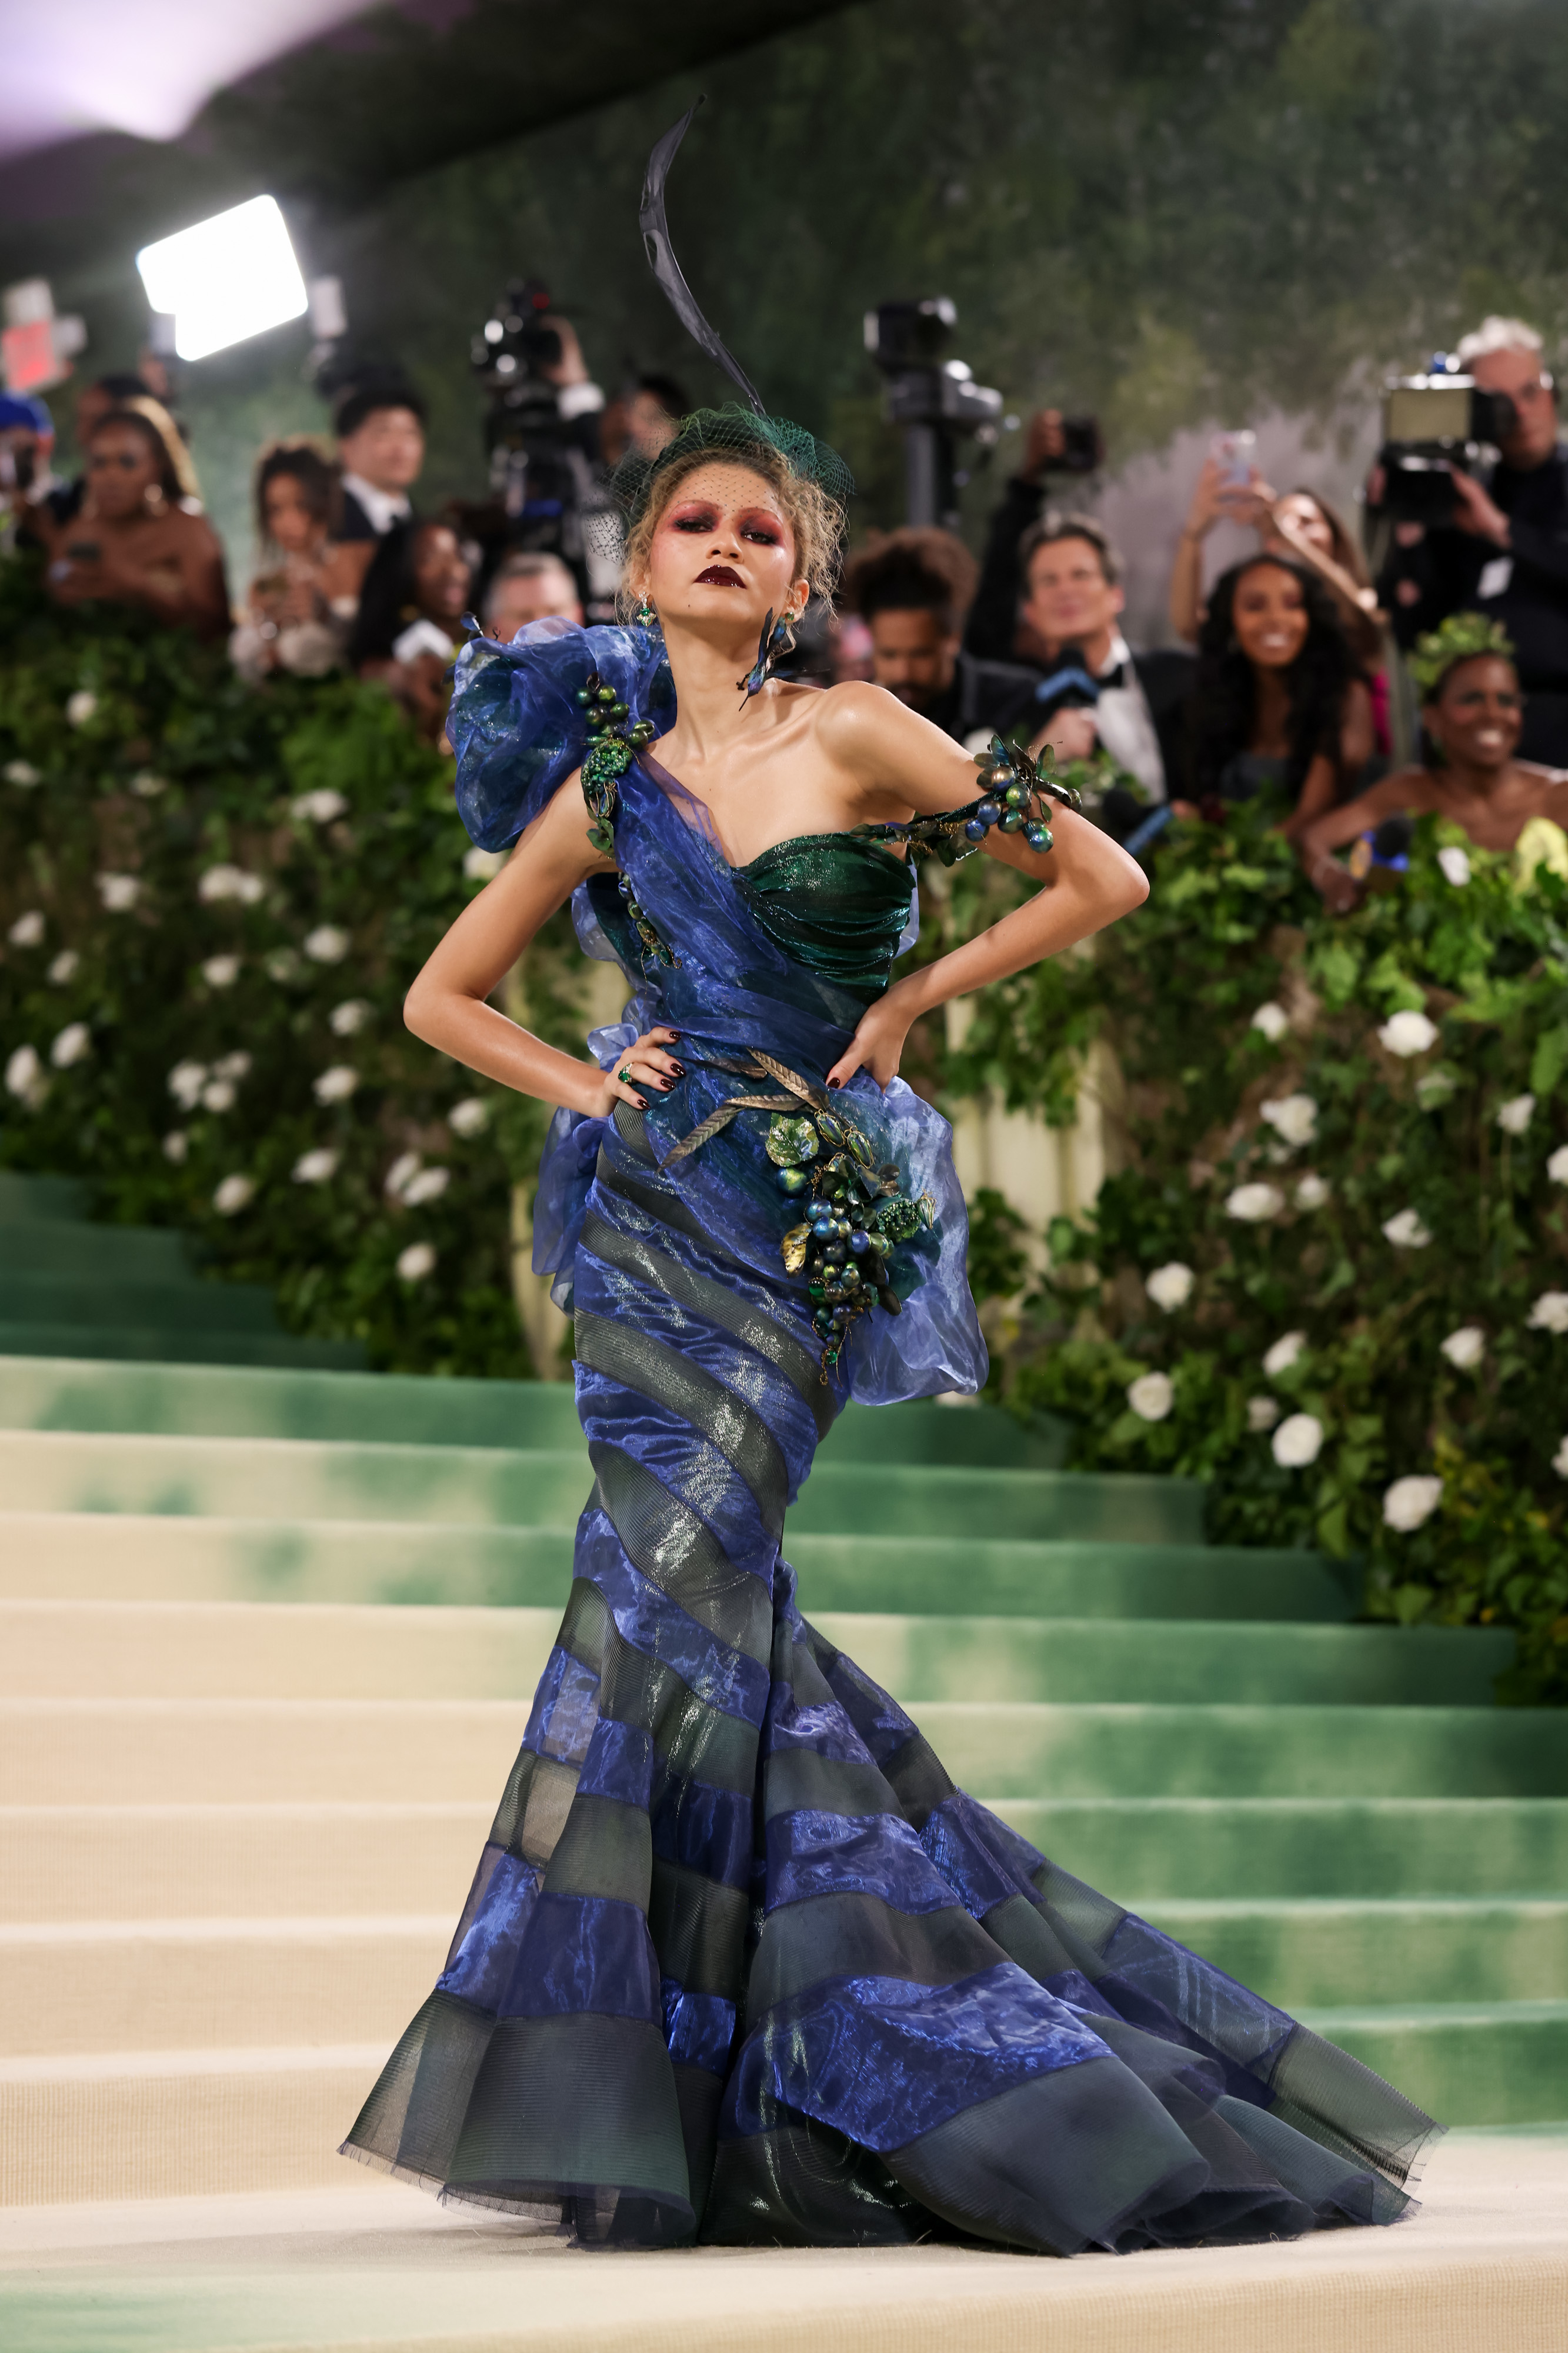 Zendaya in an elaborate blue tiered gown with shoulder embellishments on Met Gala steps